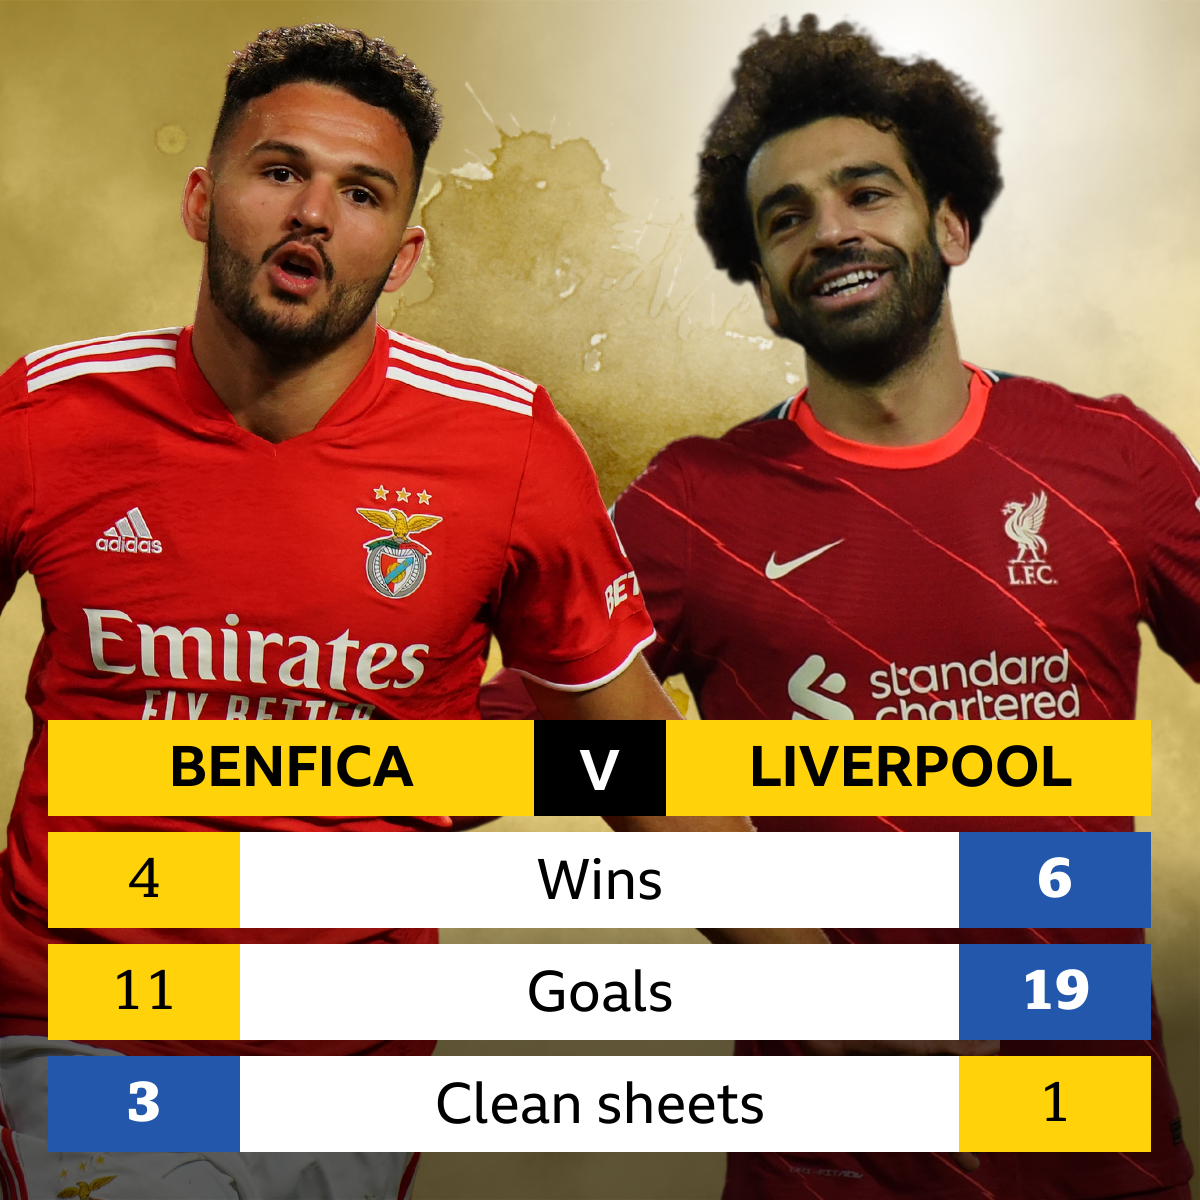 Benfica v Liverpool Head-to-head record